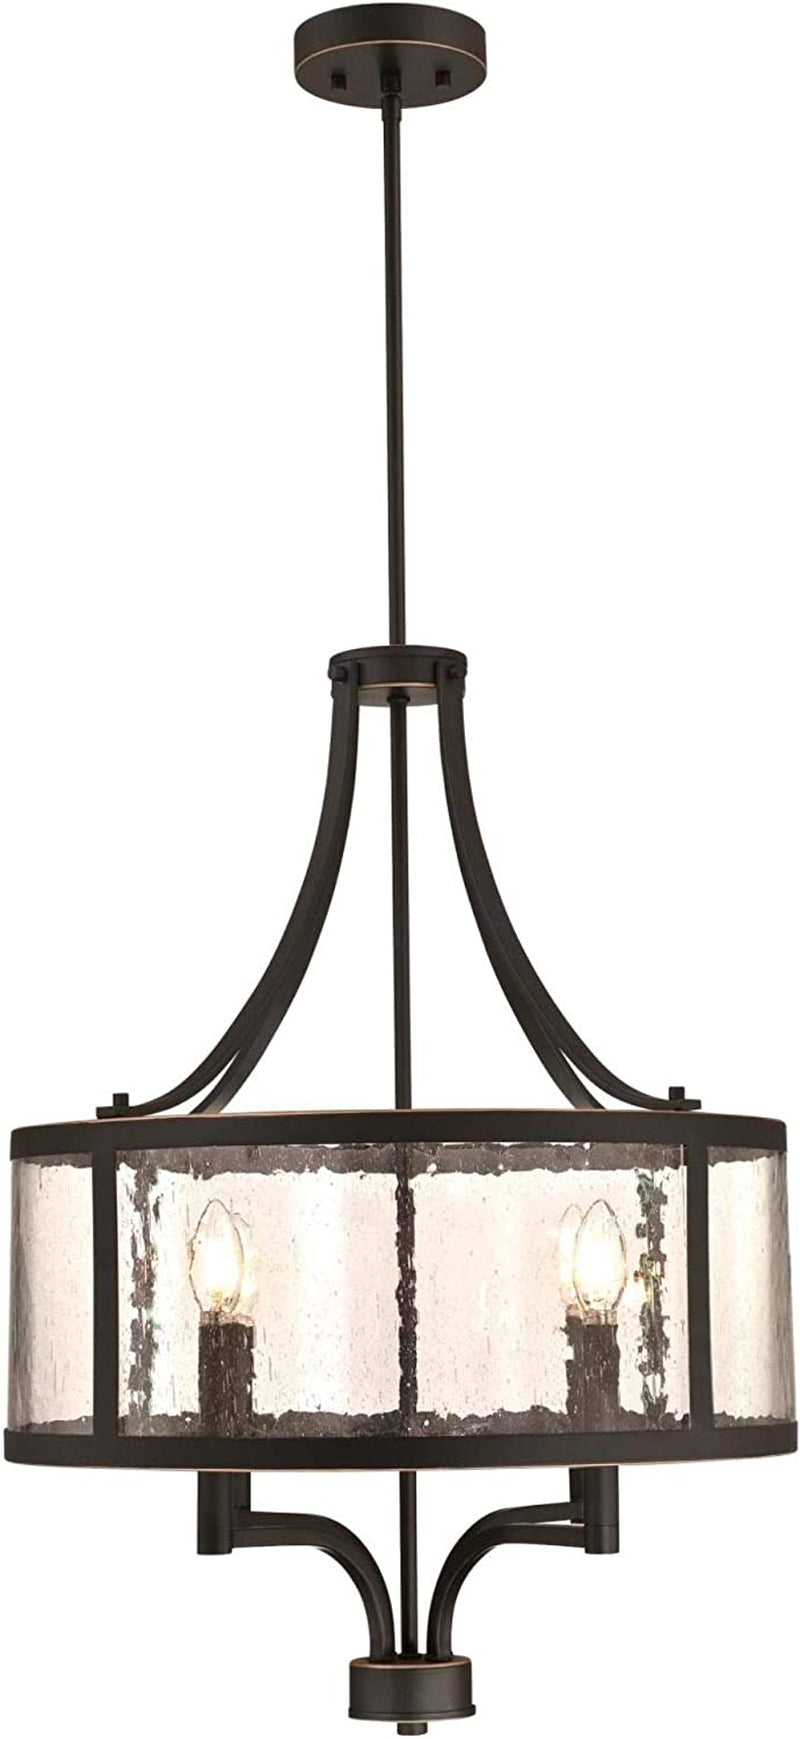 Westinghouse Lighting 6368400 Belle View Four-Light Indoor, Oil Rubbed Bronze Finish with Highlights and Clear Seeded Glass Chandelier, One Size , Oil-Rubbed Bronze Home & Garden > Lighting > Lighting Fixtures > Chandeliers Westinghouse Lighting   